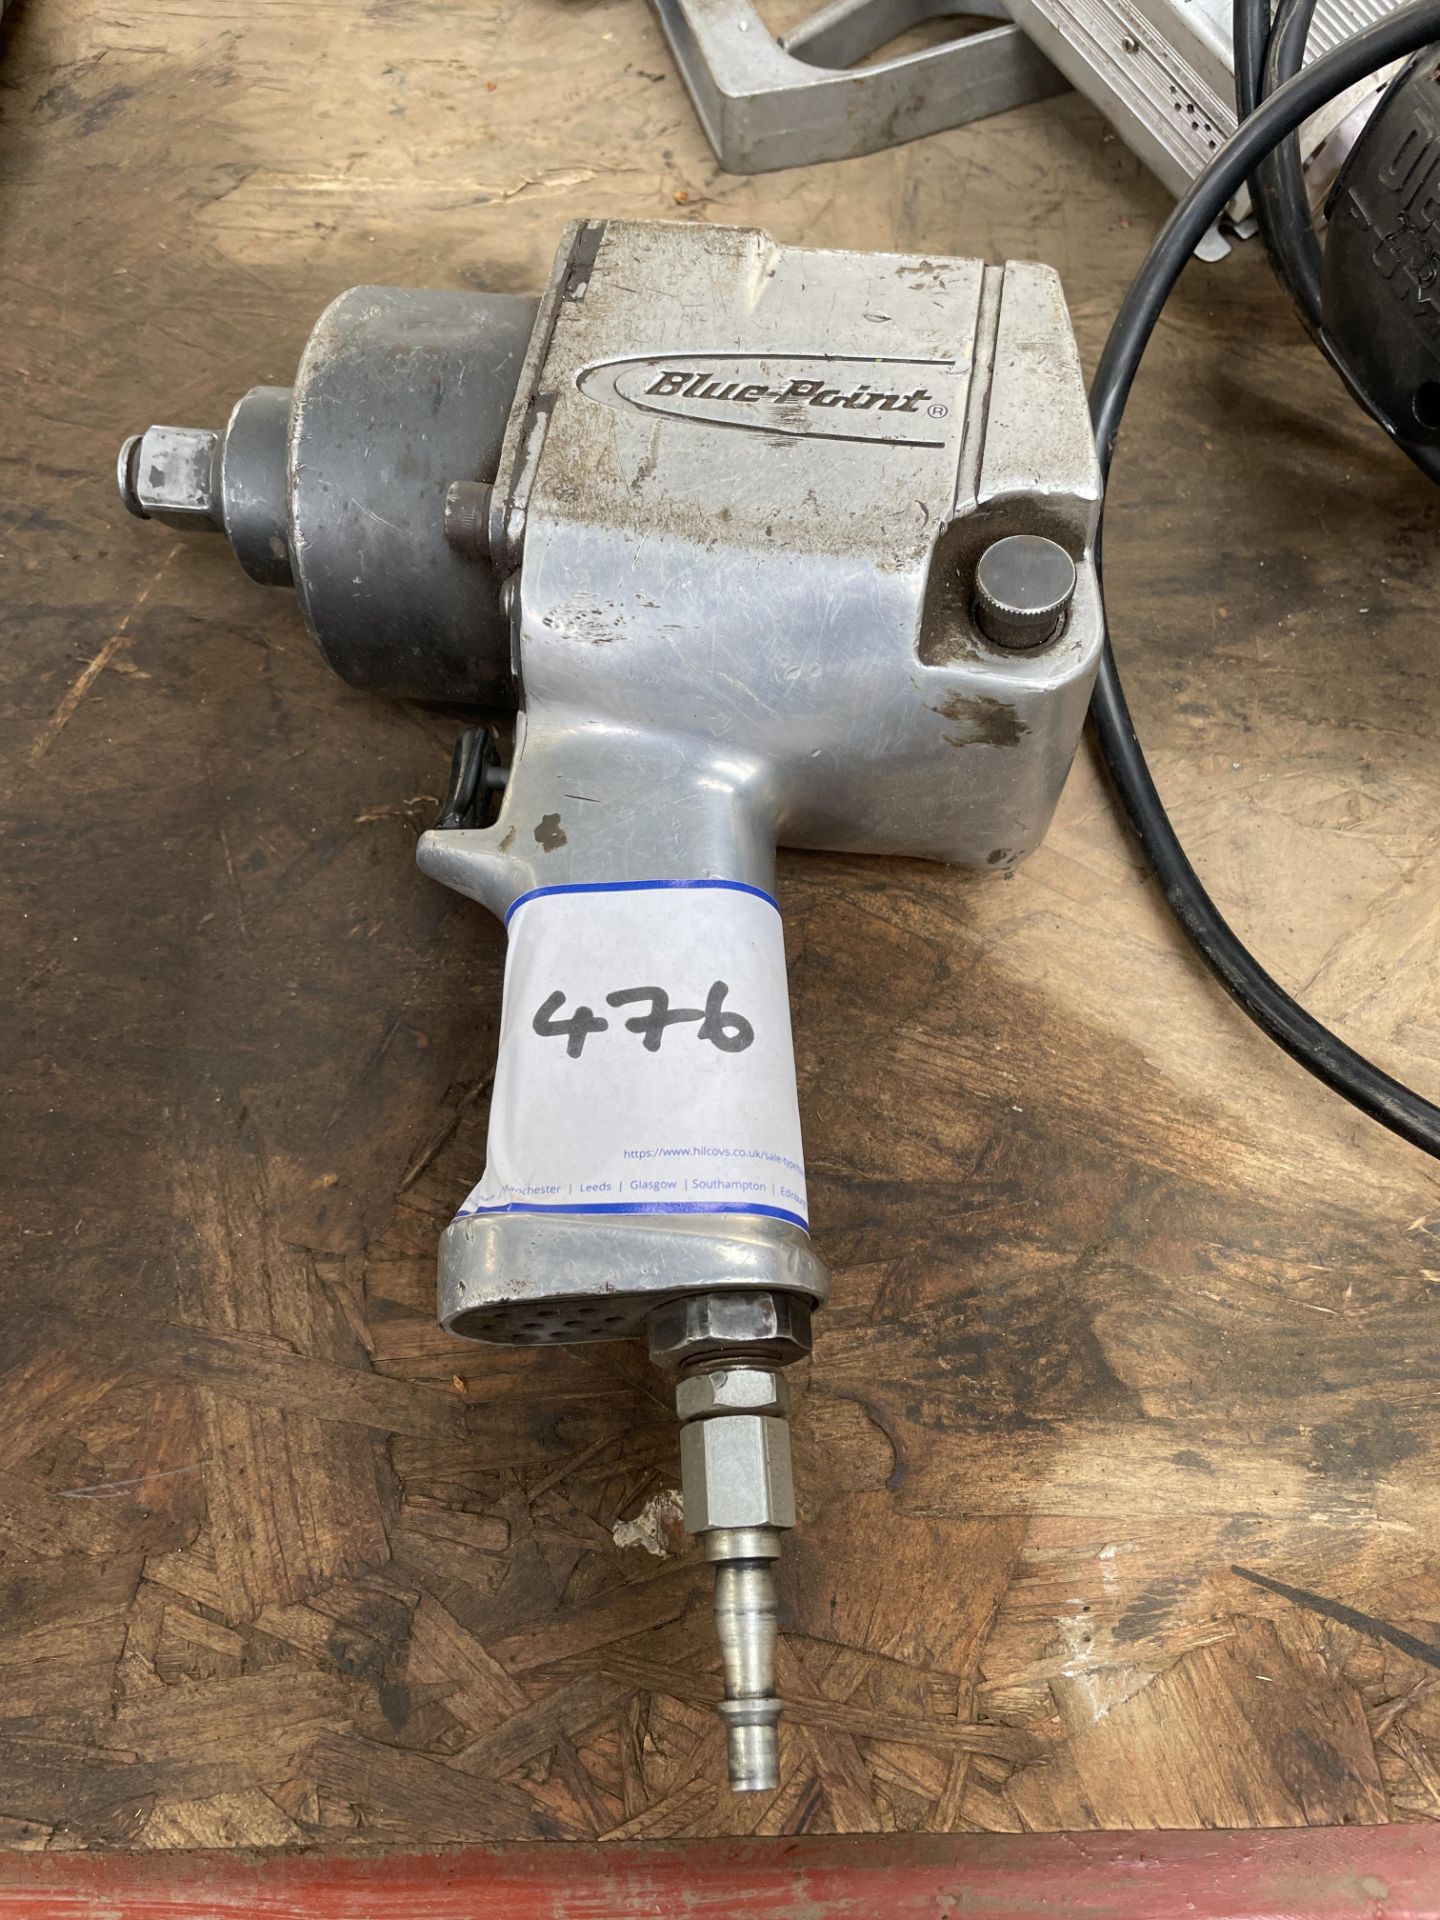 1: Blue Point AT26 Pneumatic 3/4"" Impact Wrench